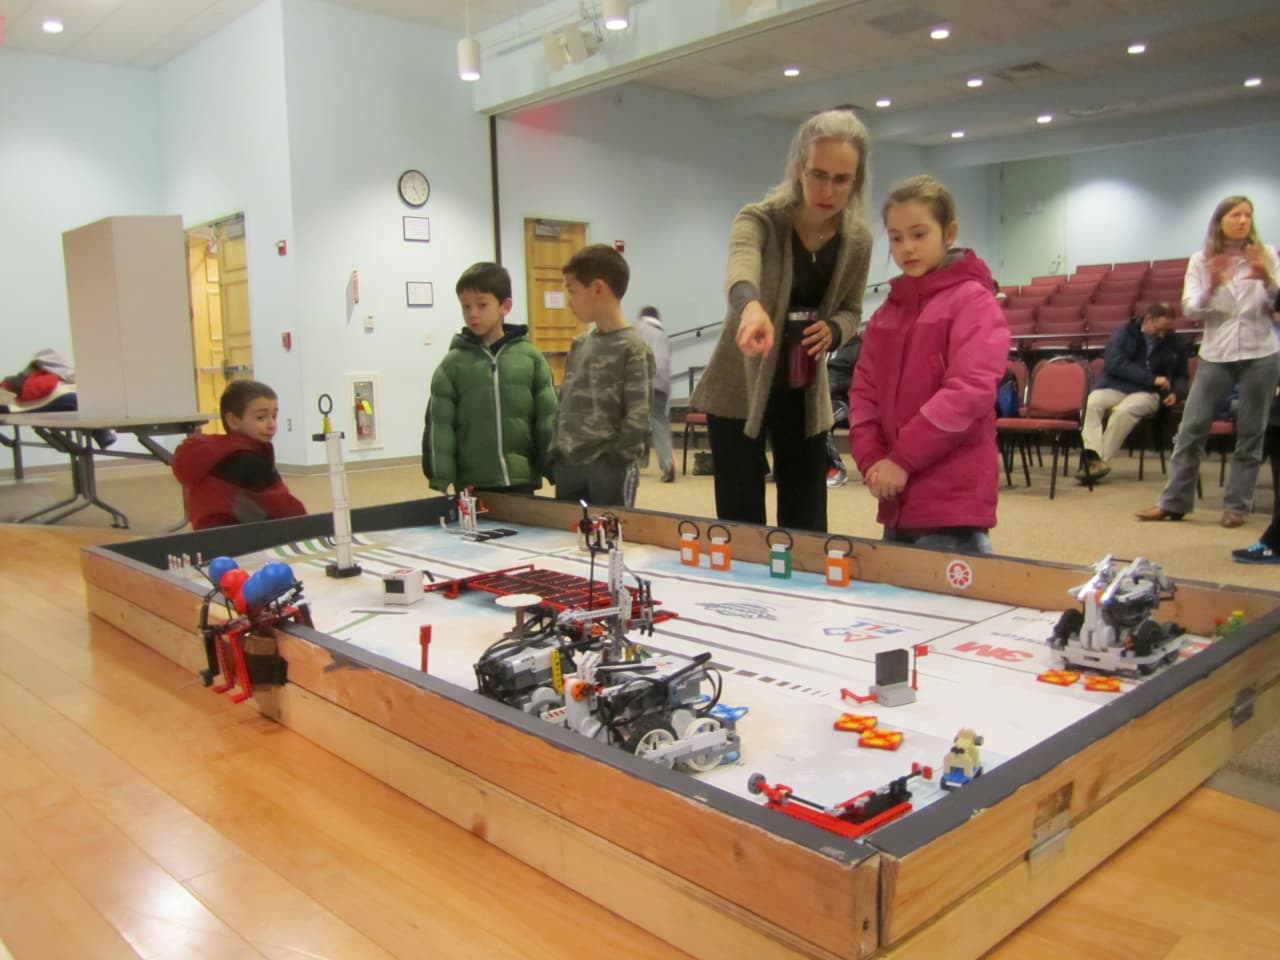 Students can enjoy a STEAM program Jan. 9 at the Glen Rock Library.